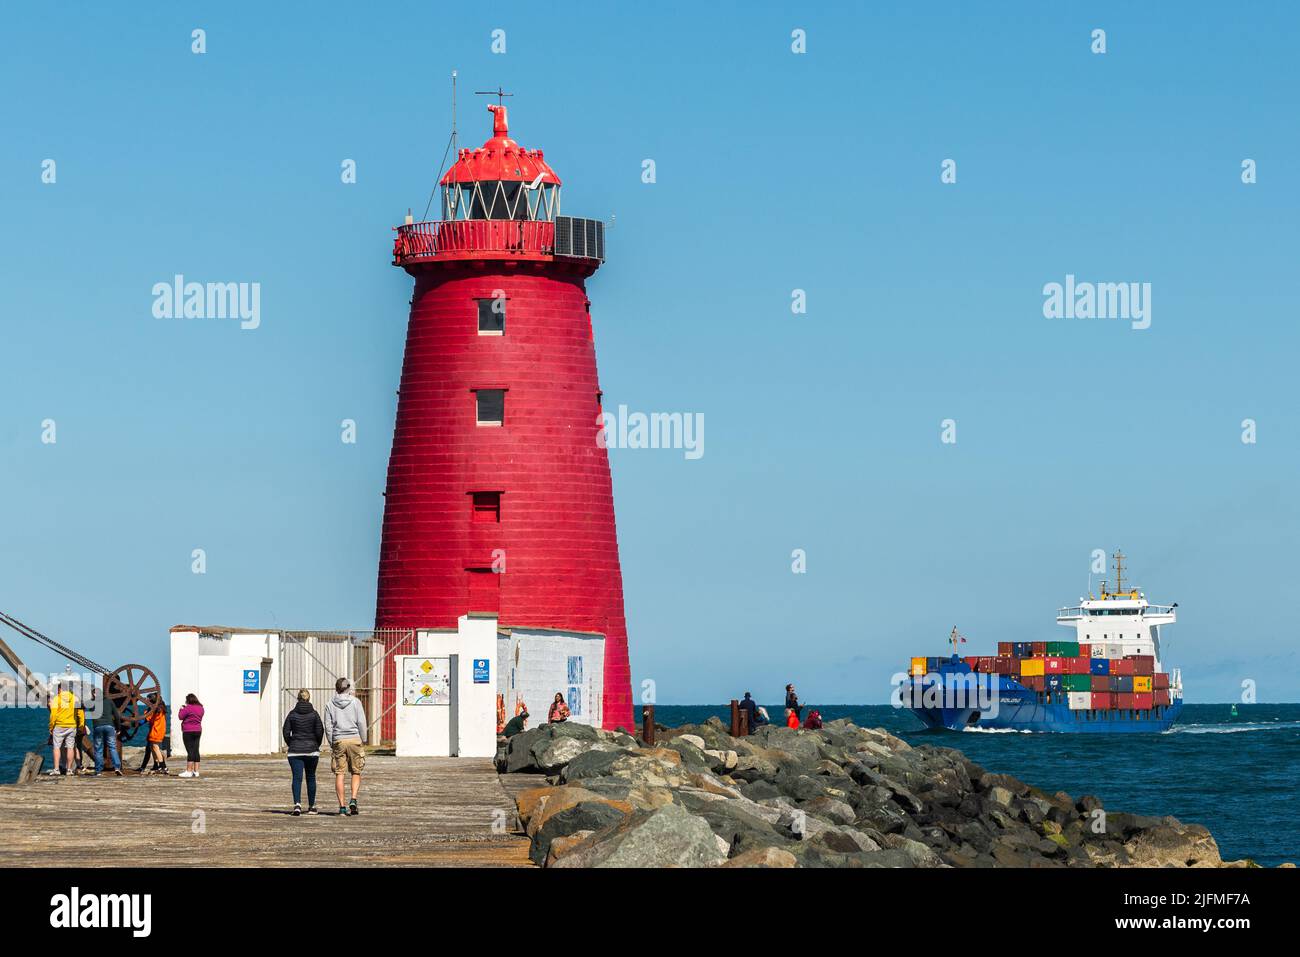 Container ship 'Solong' approaches Poolbeg Lighthouse in Dublin Port, Dublin, Ireland. Stock Photo